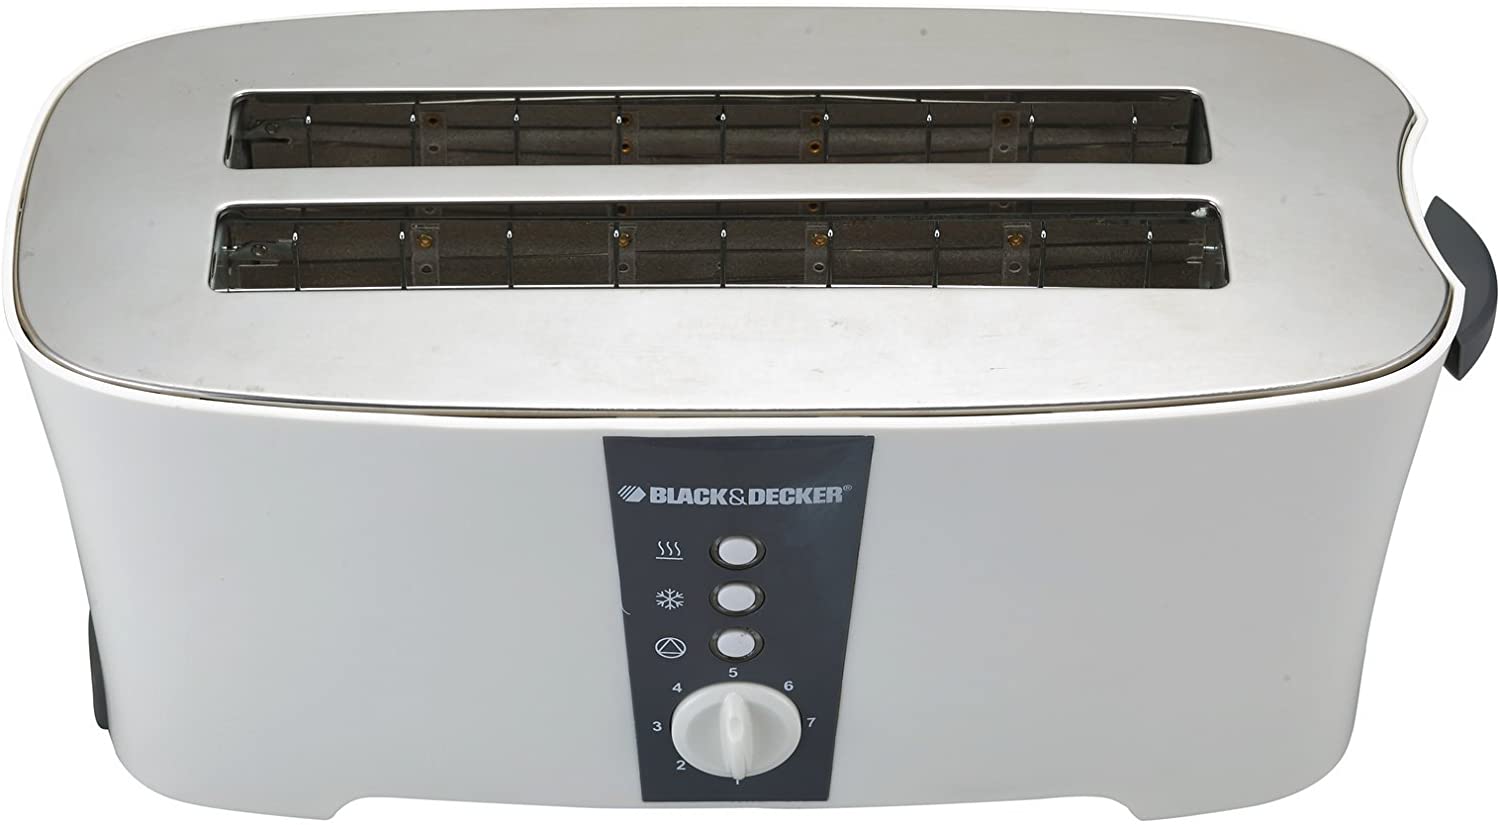 Black And Decker ET124 220 Volt 4-Slice Cool-Touch Toaster For Export Overseas Use